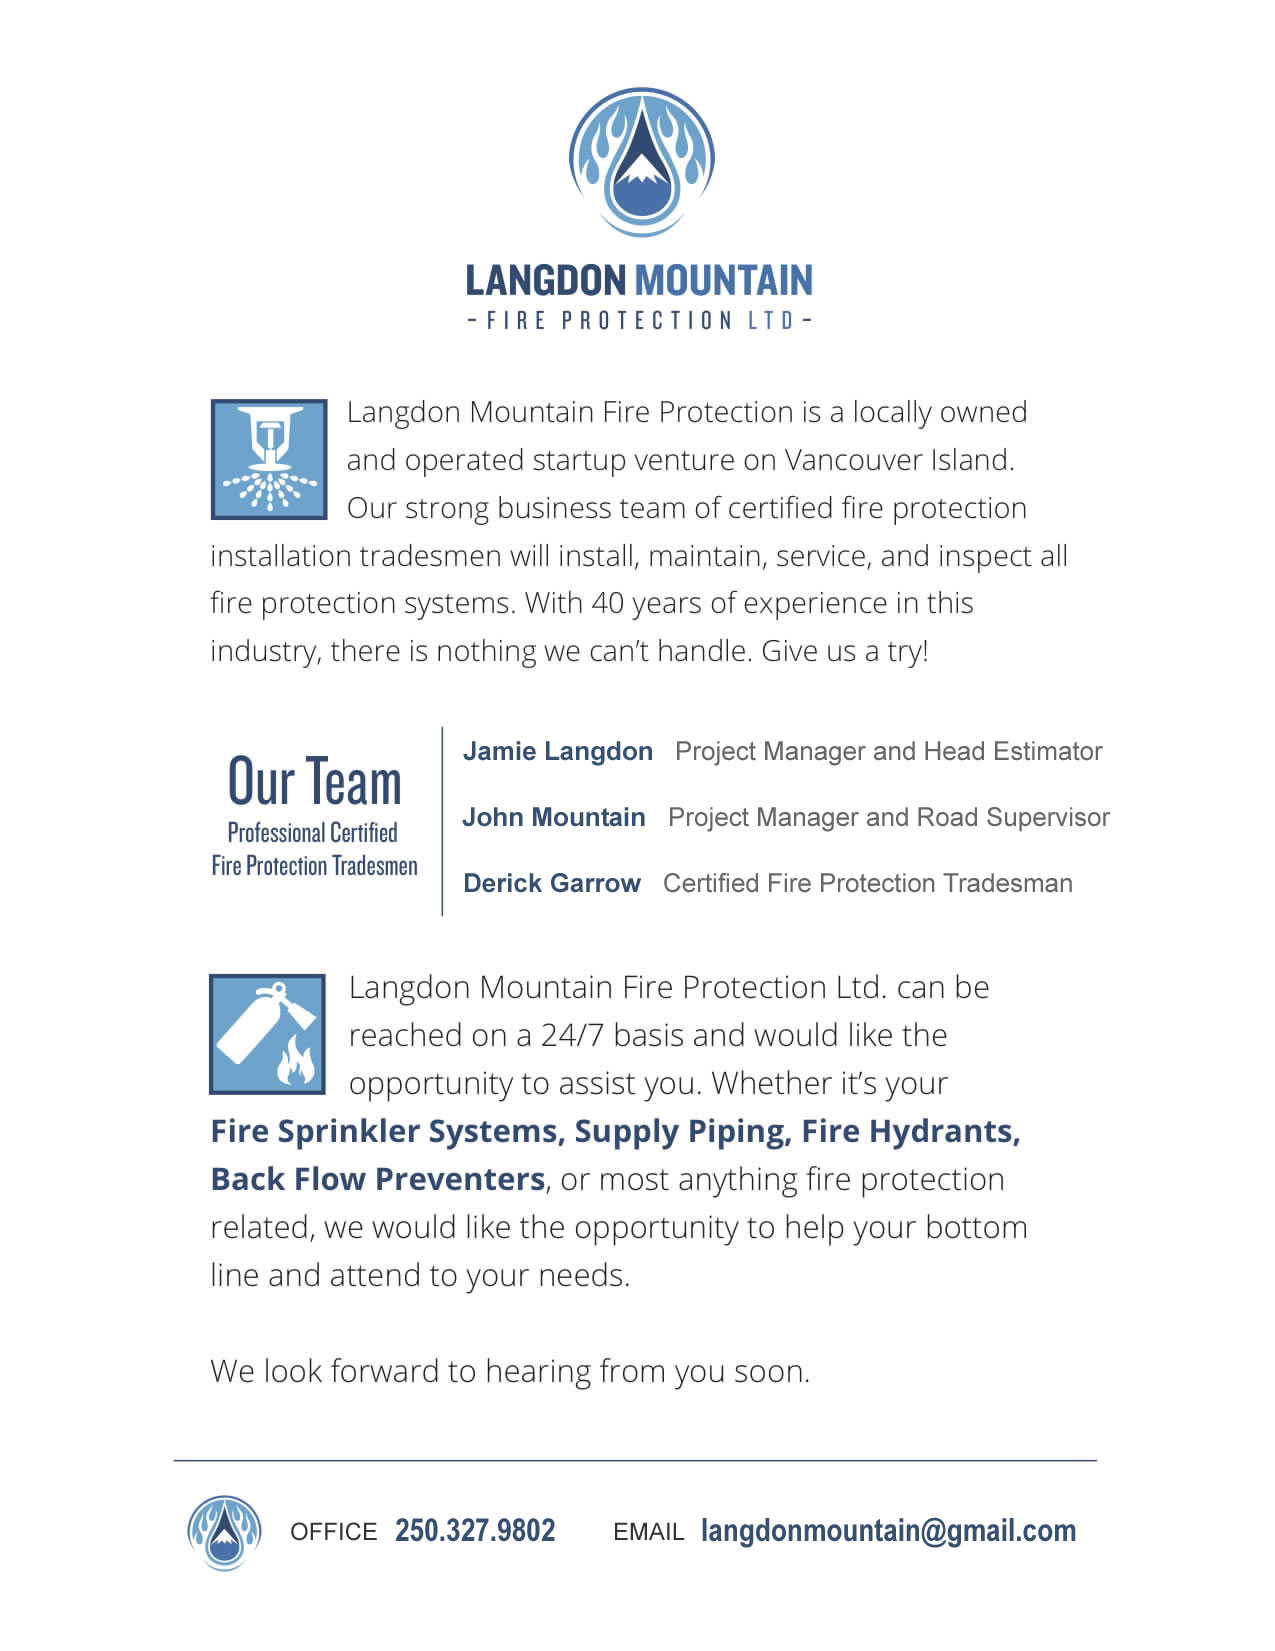 Langdon Mountain Fire Protection Ltd.  COVER LETTER